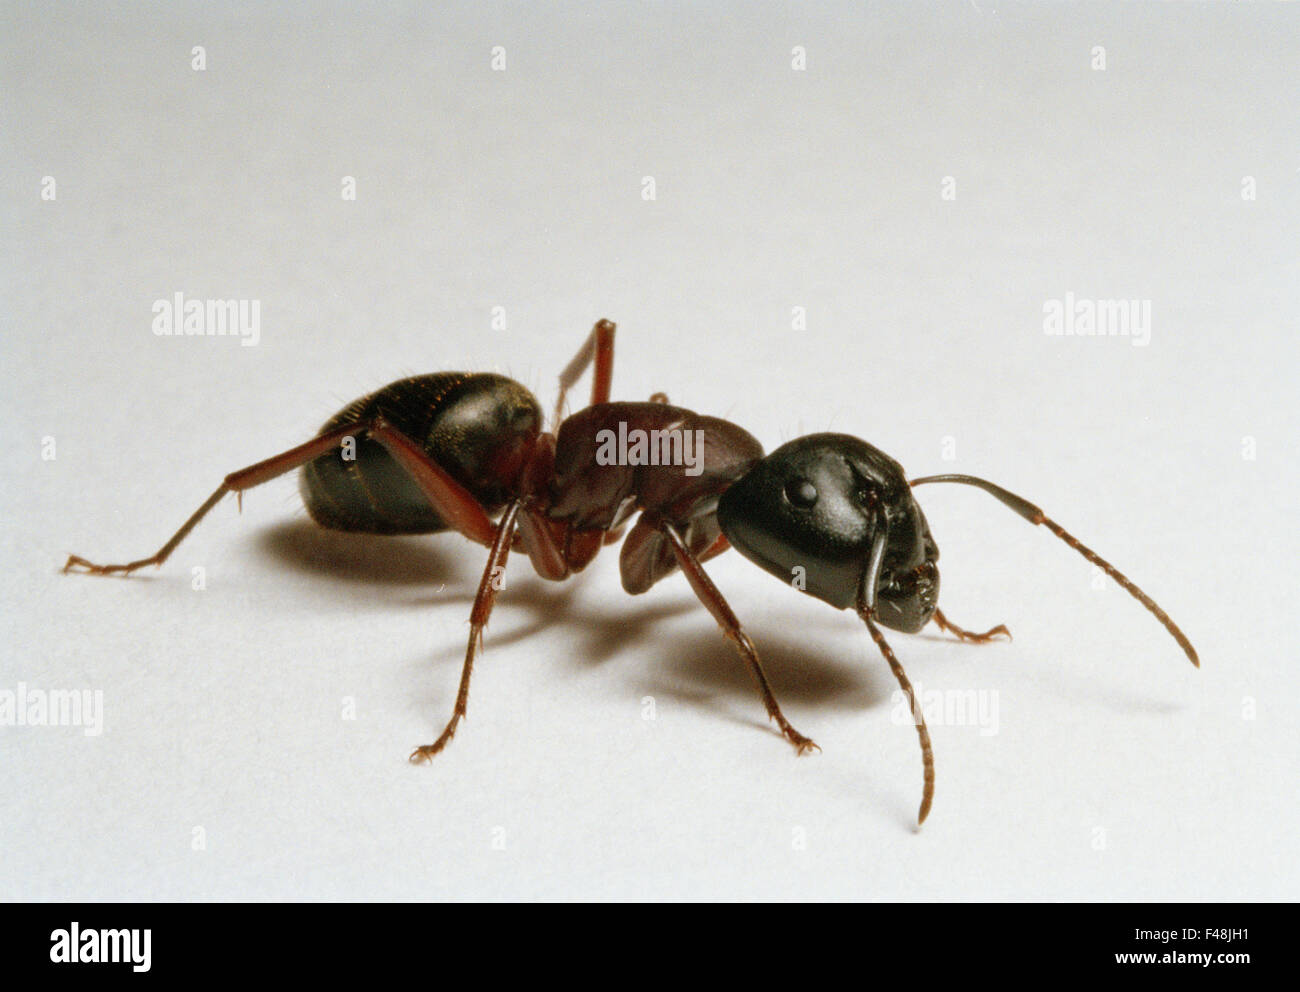 This Is A Close Up Of A Big Ant With Big Antennae Background